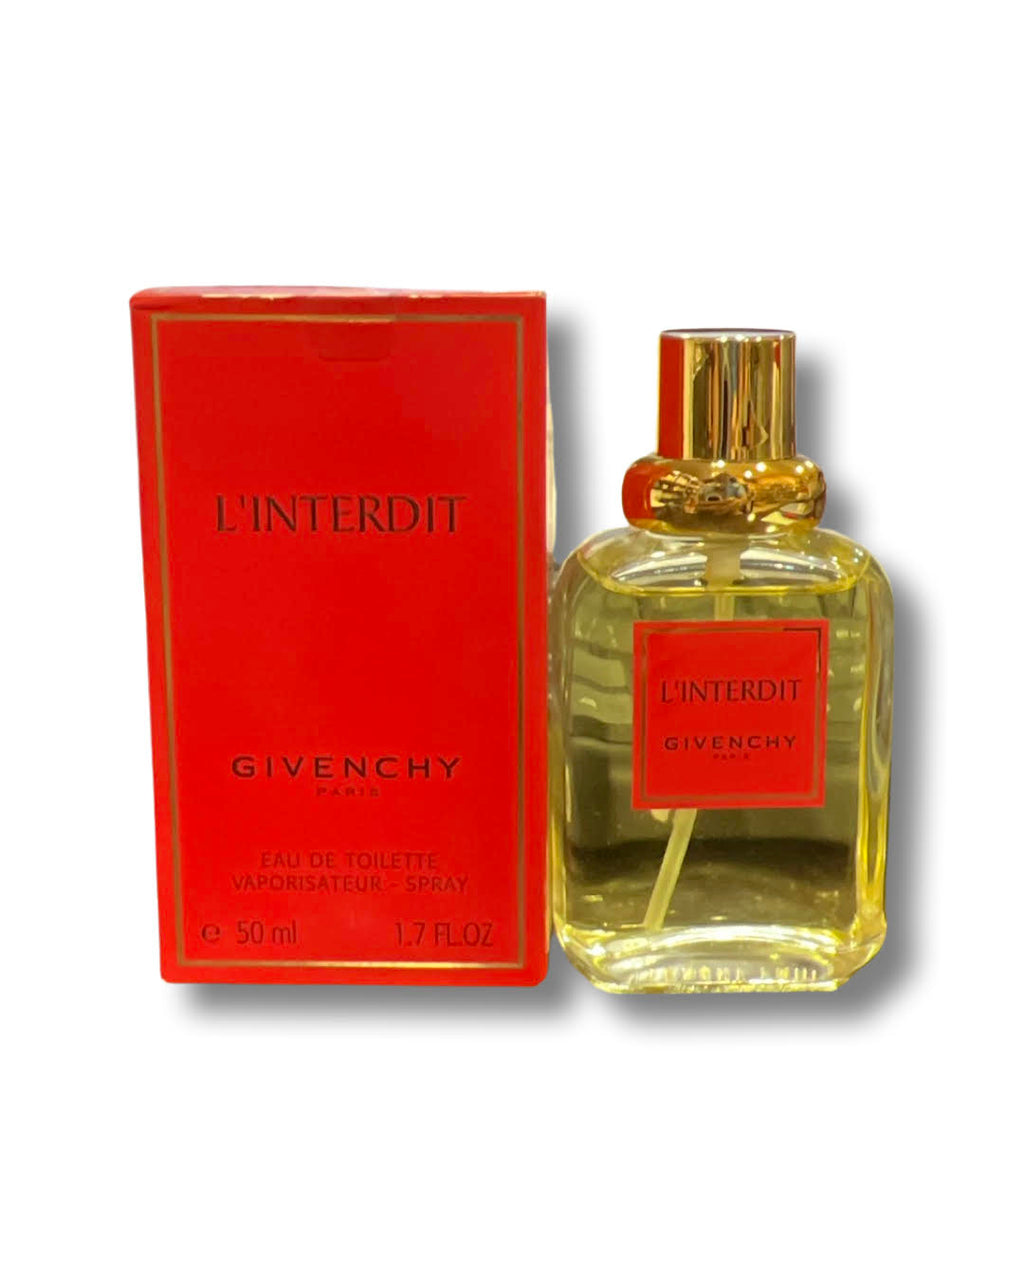 L&#039;Interdit Givenchy perfume - a fragrance for women 1957